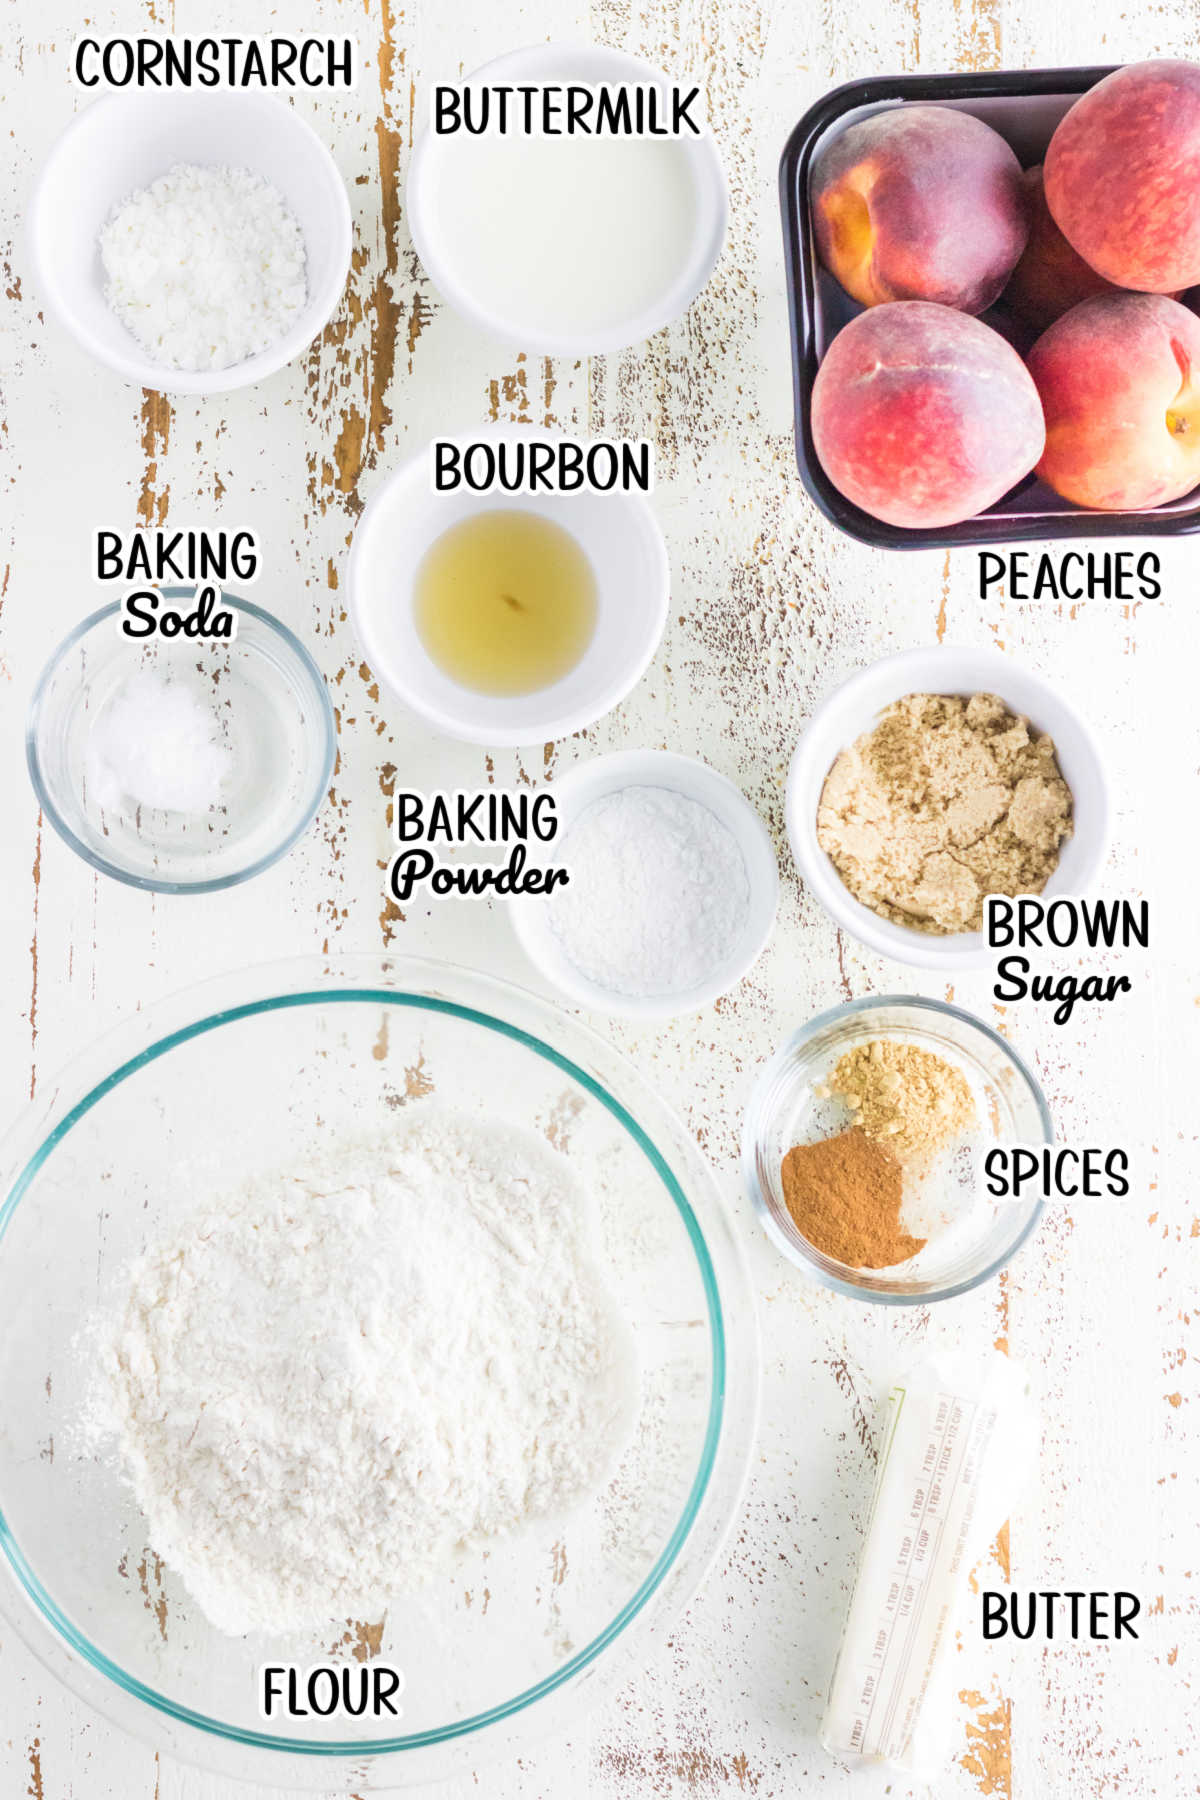 Labeled ingredients for peach cobbler.